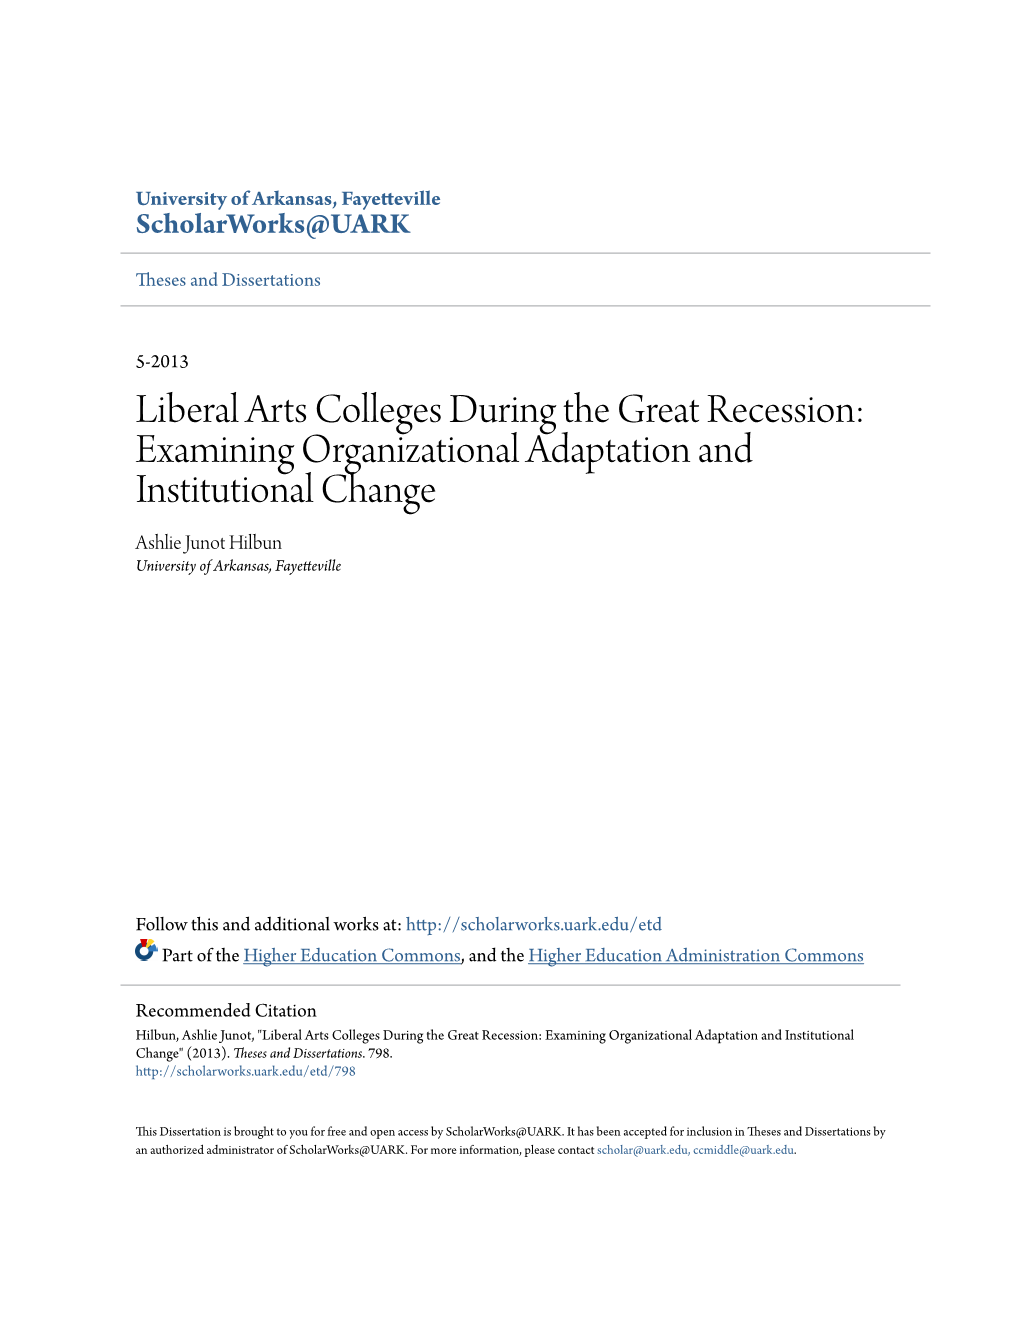 Liberal Arts Colleges During the Great Recession